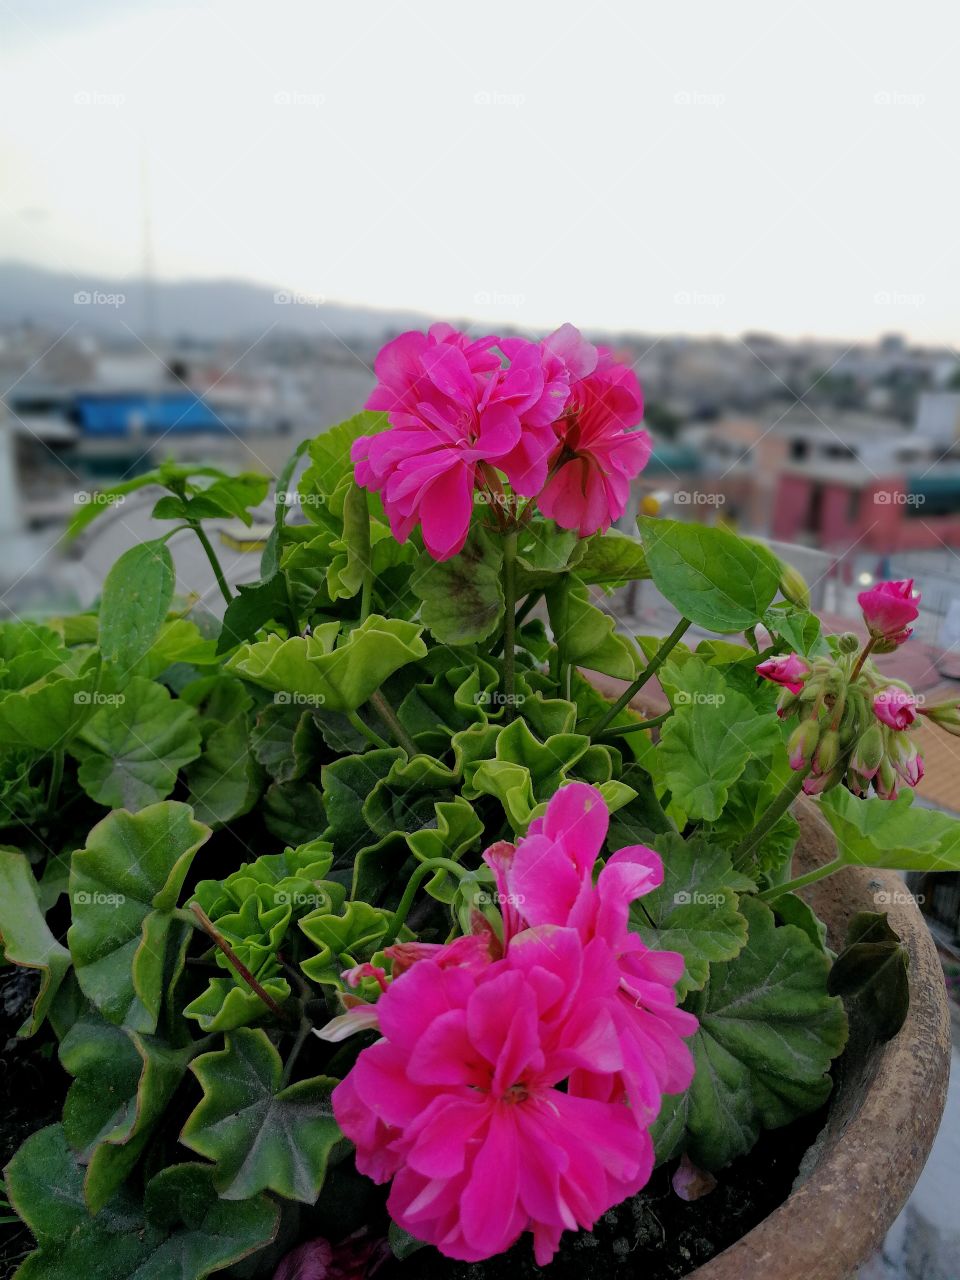 Arequipa, Peru. A flower that stands out in the city.